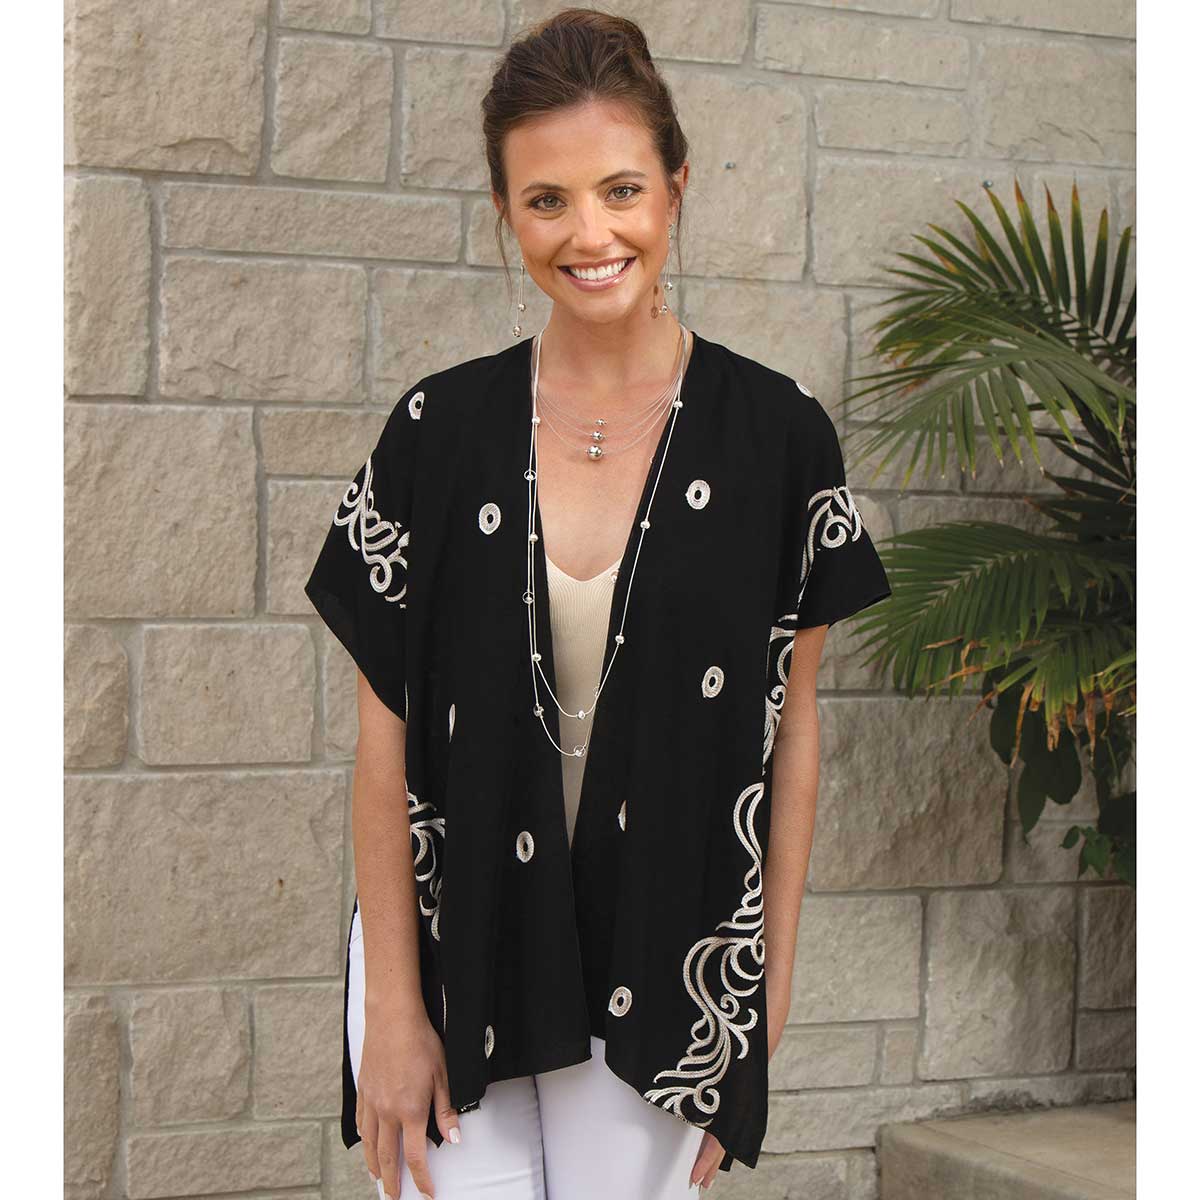 Black Vest with Tan Embroidered Scroll Design 27.5"x28.5"